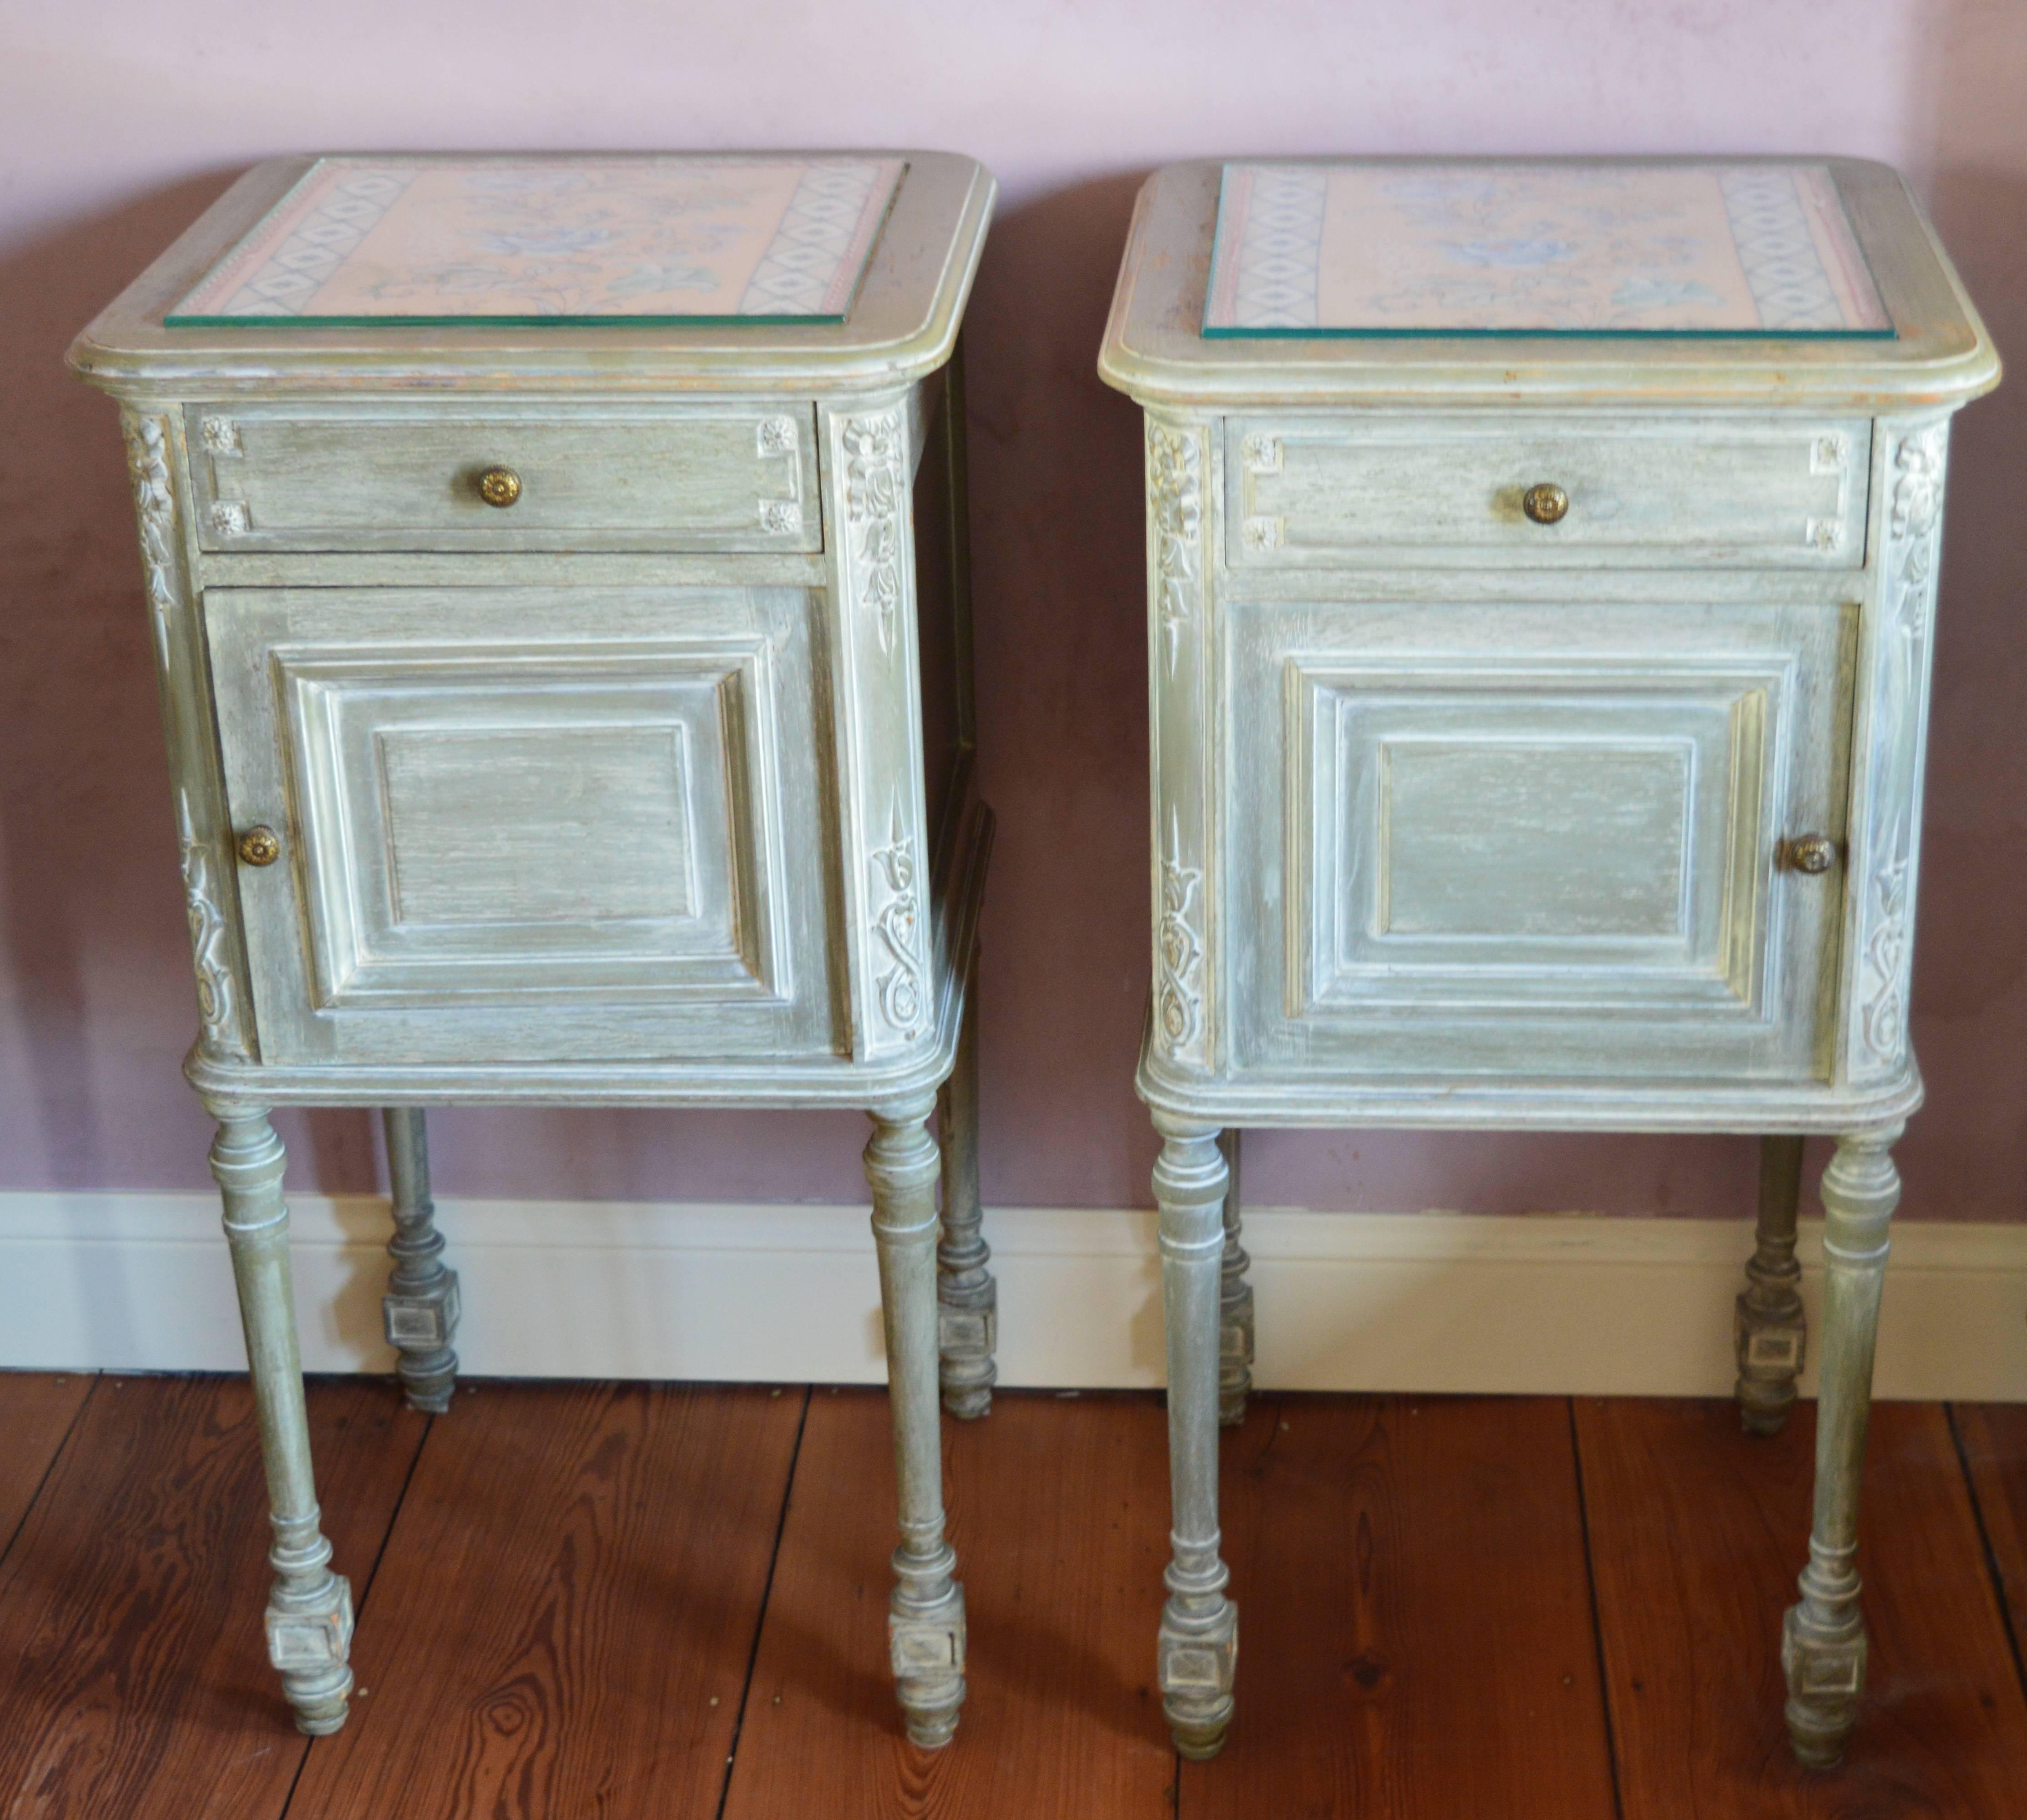 This pair of French Louis XVI style bedside cabinets are in very good condition and retain the original paint and cast bronze knobs.
They are handmade from French white oak and have elegant hand-carved decorations of ribboned swags and foliate